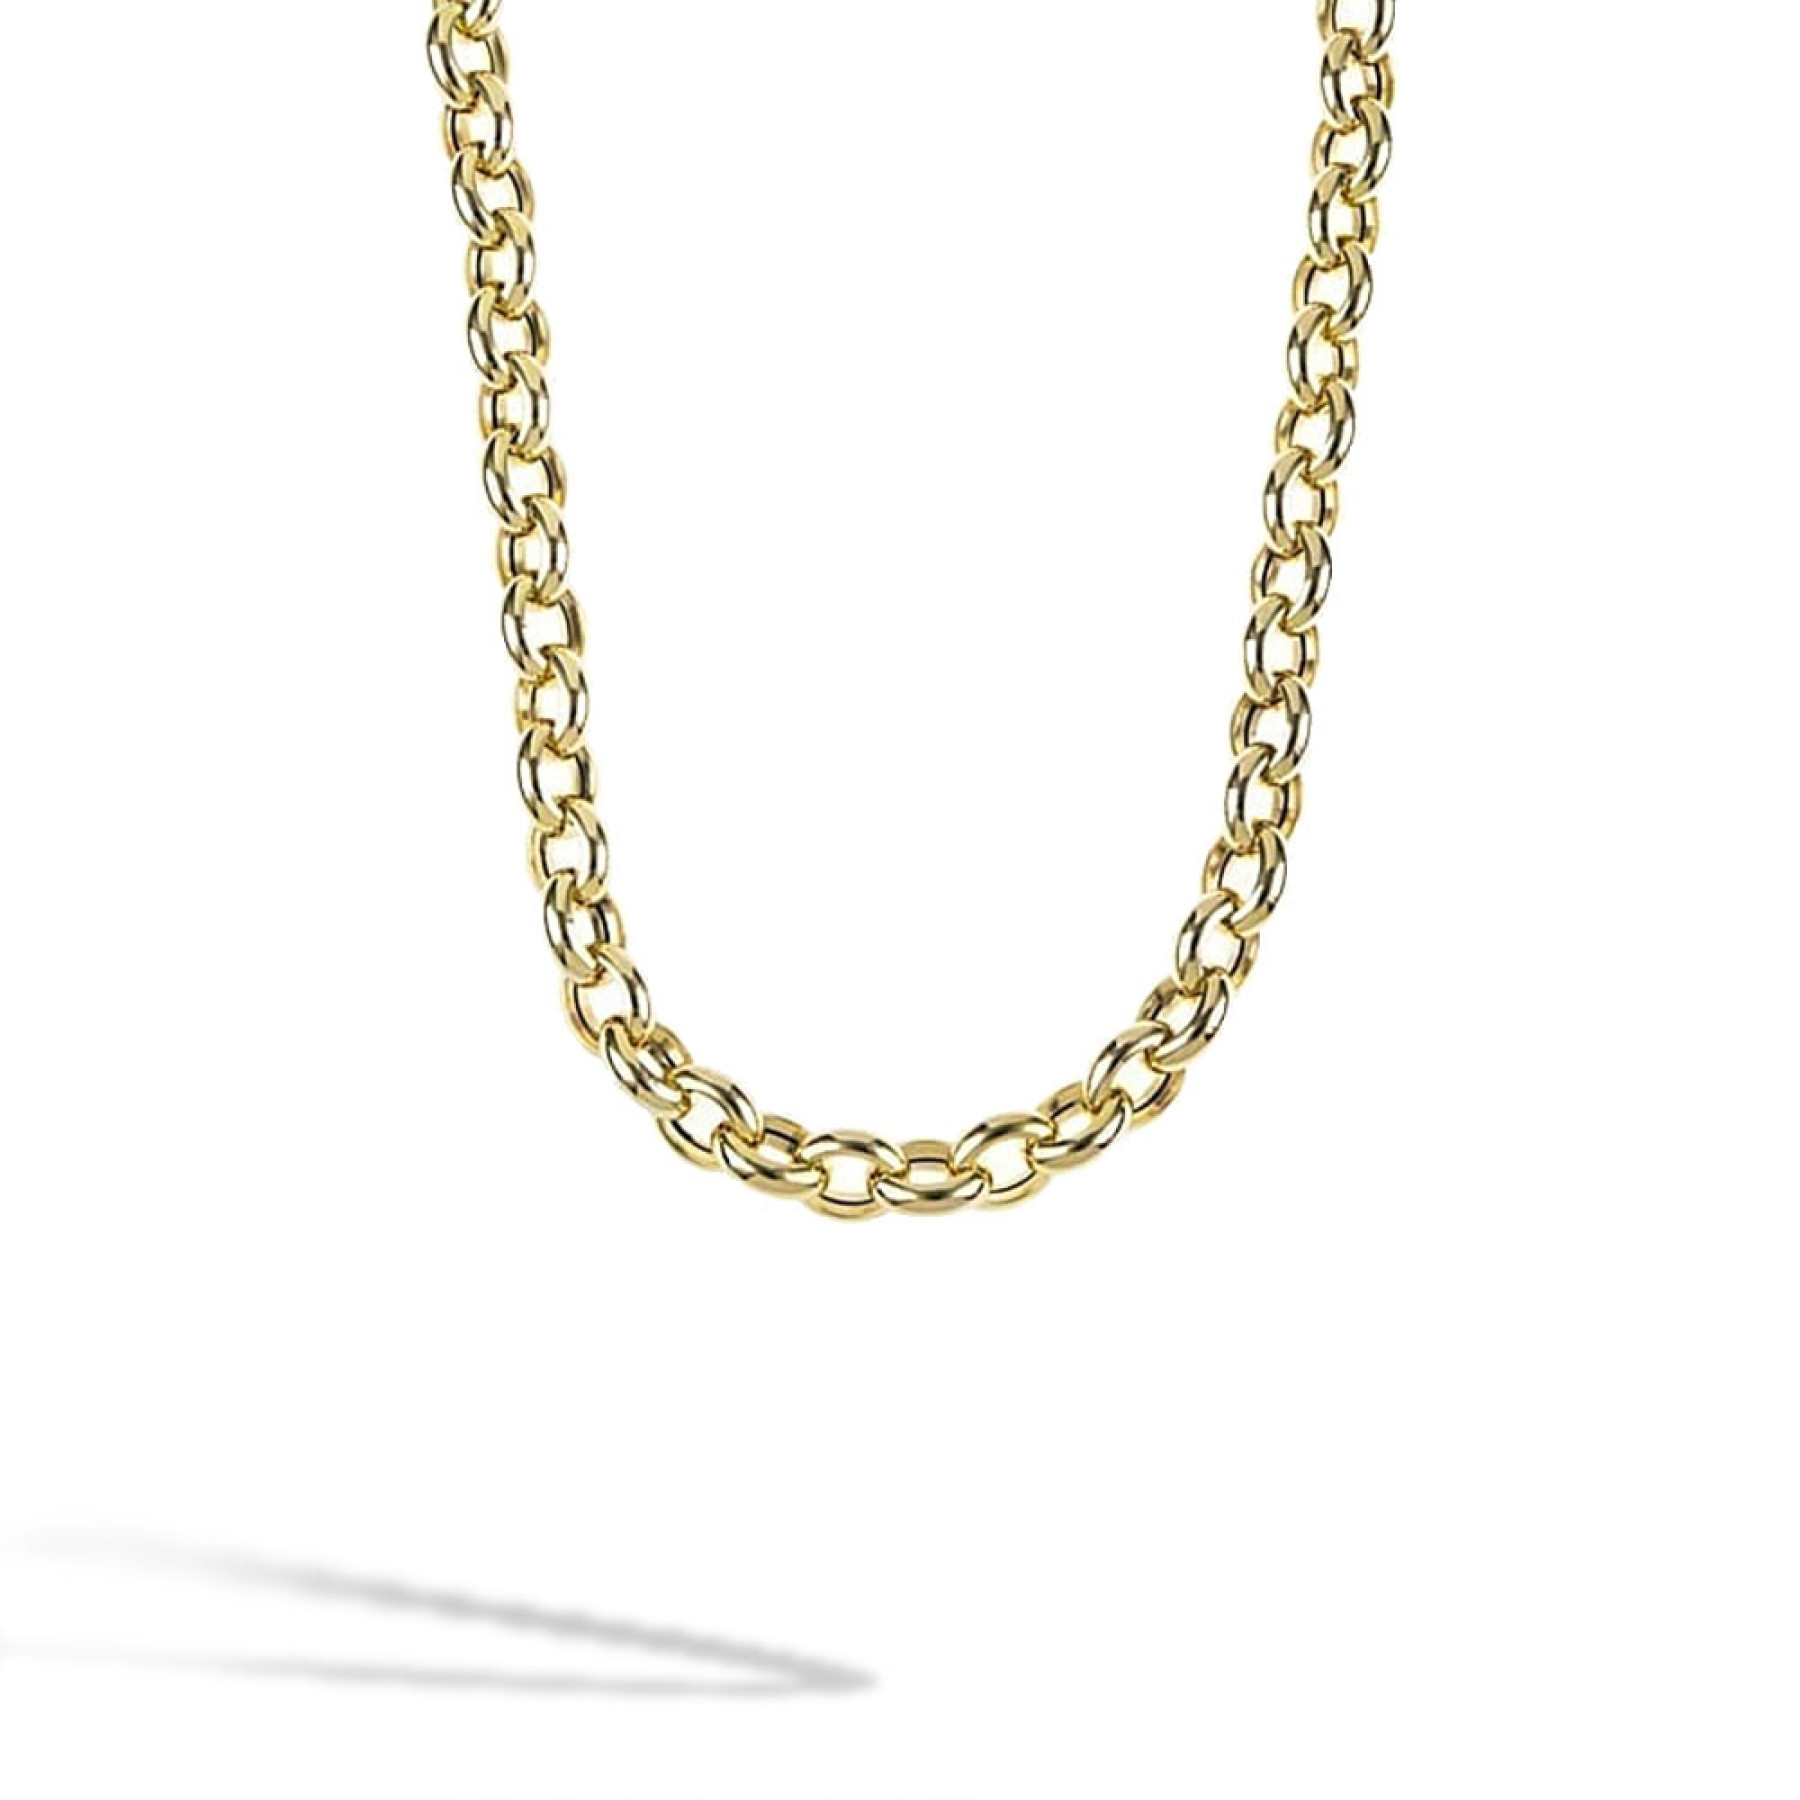 8.5mm Chunky Solid .925 Sterling Silver Flat Cuban Link Curb Chain Necklace,  22 inches + Gift Box - Walmart.com